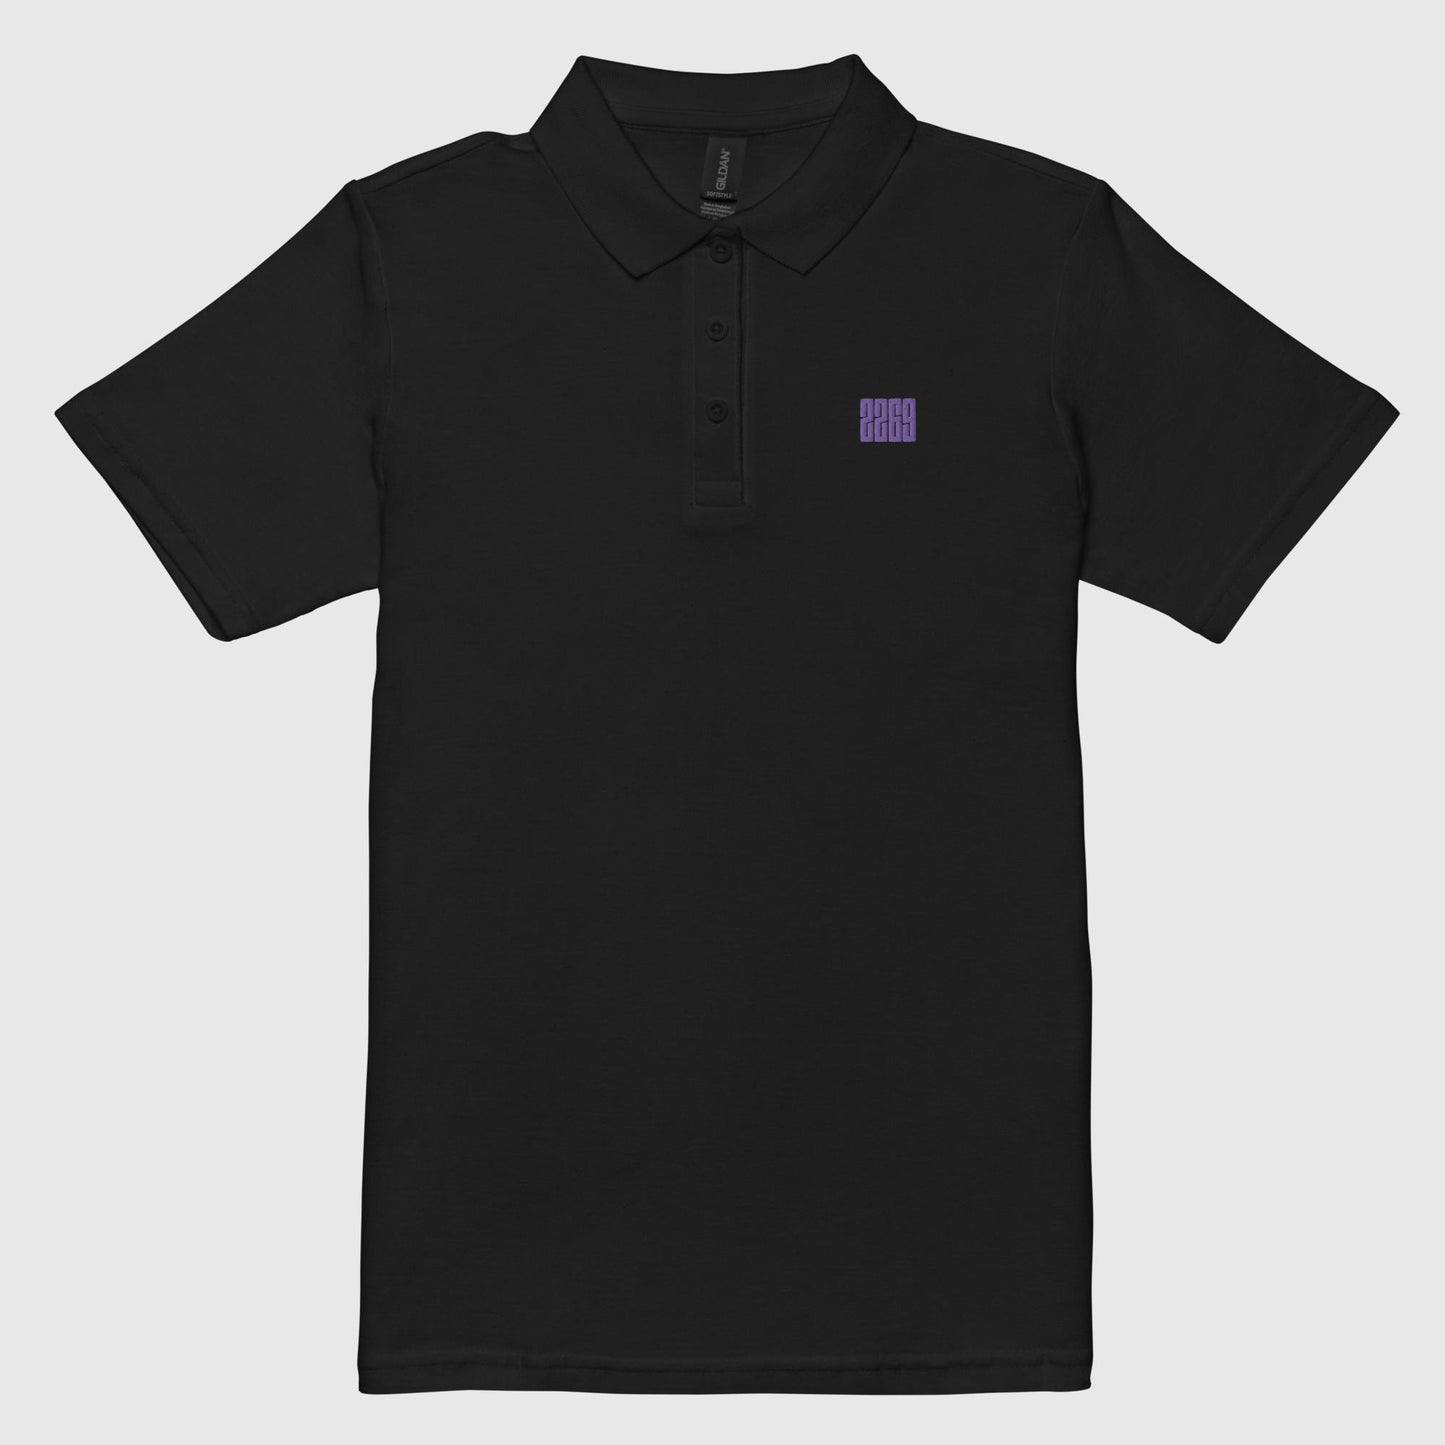 Women’s black pique polo shirt with embroidered 2269 logo